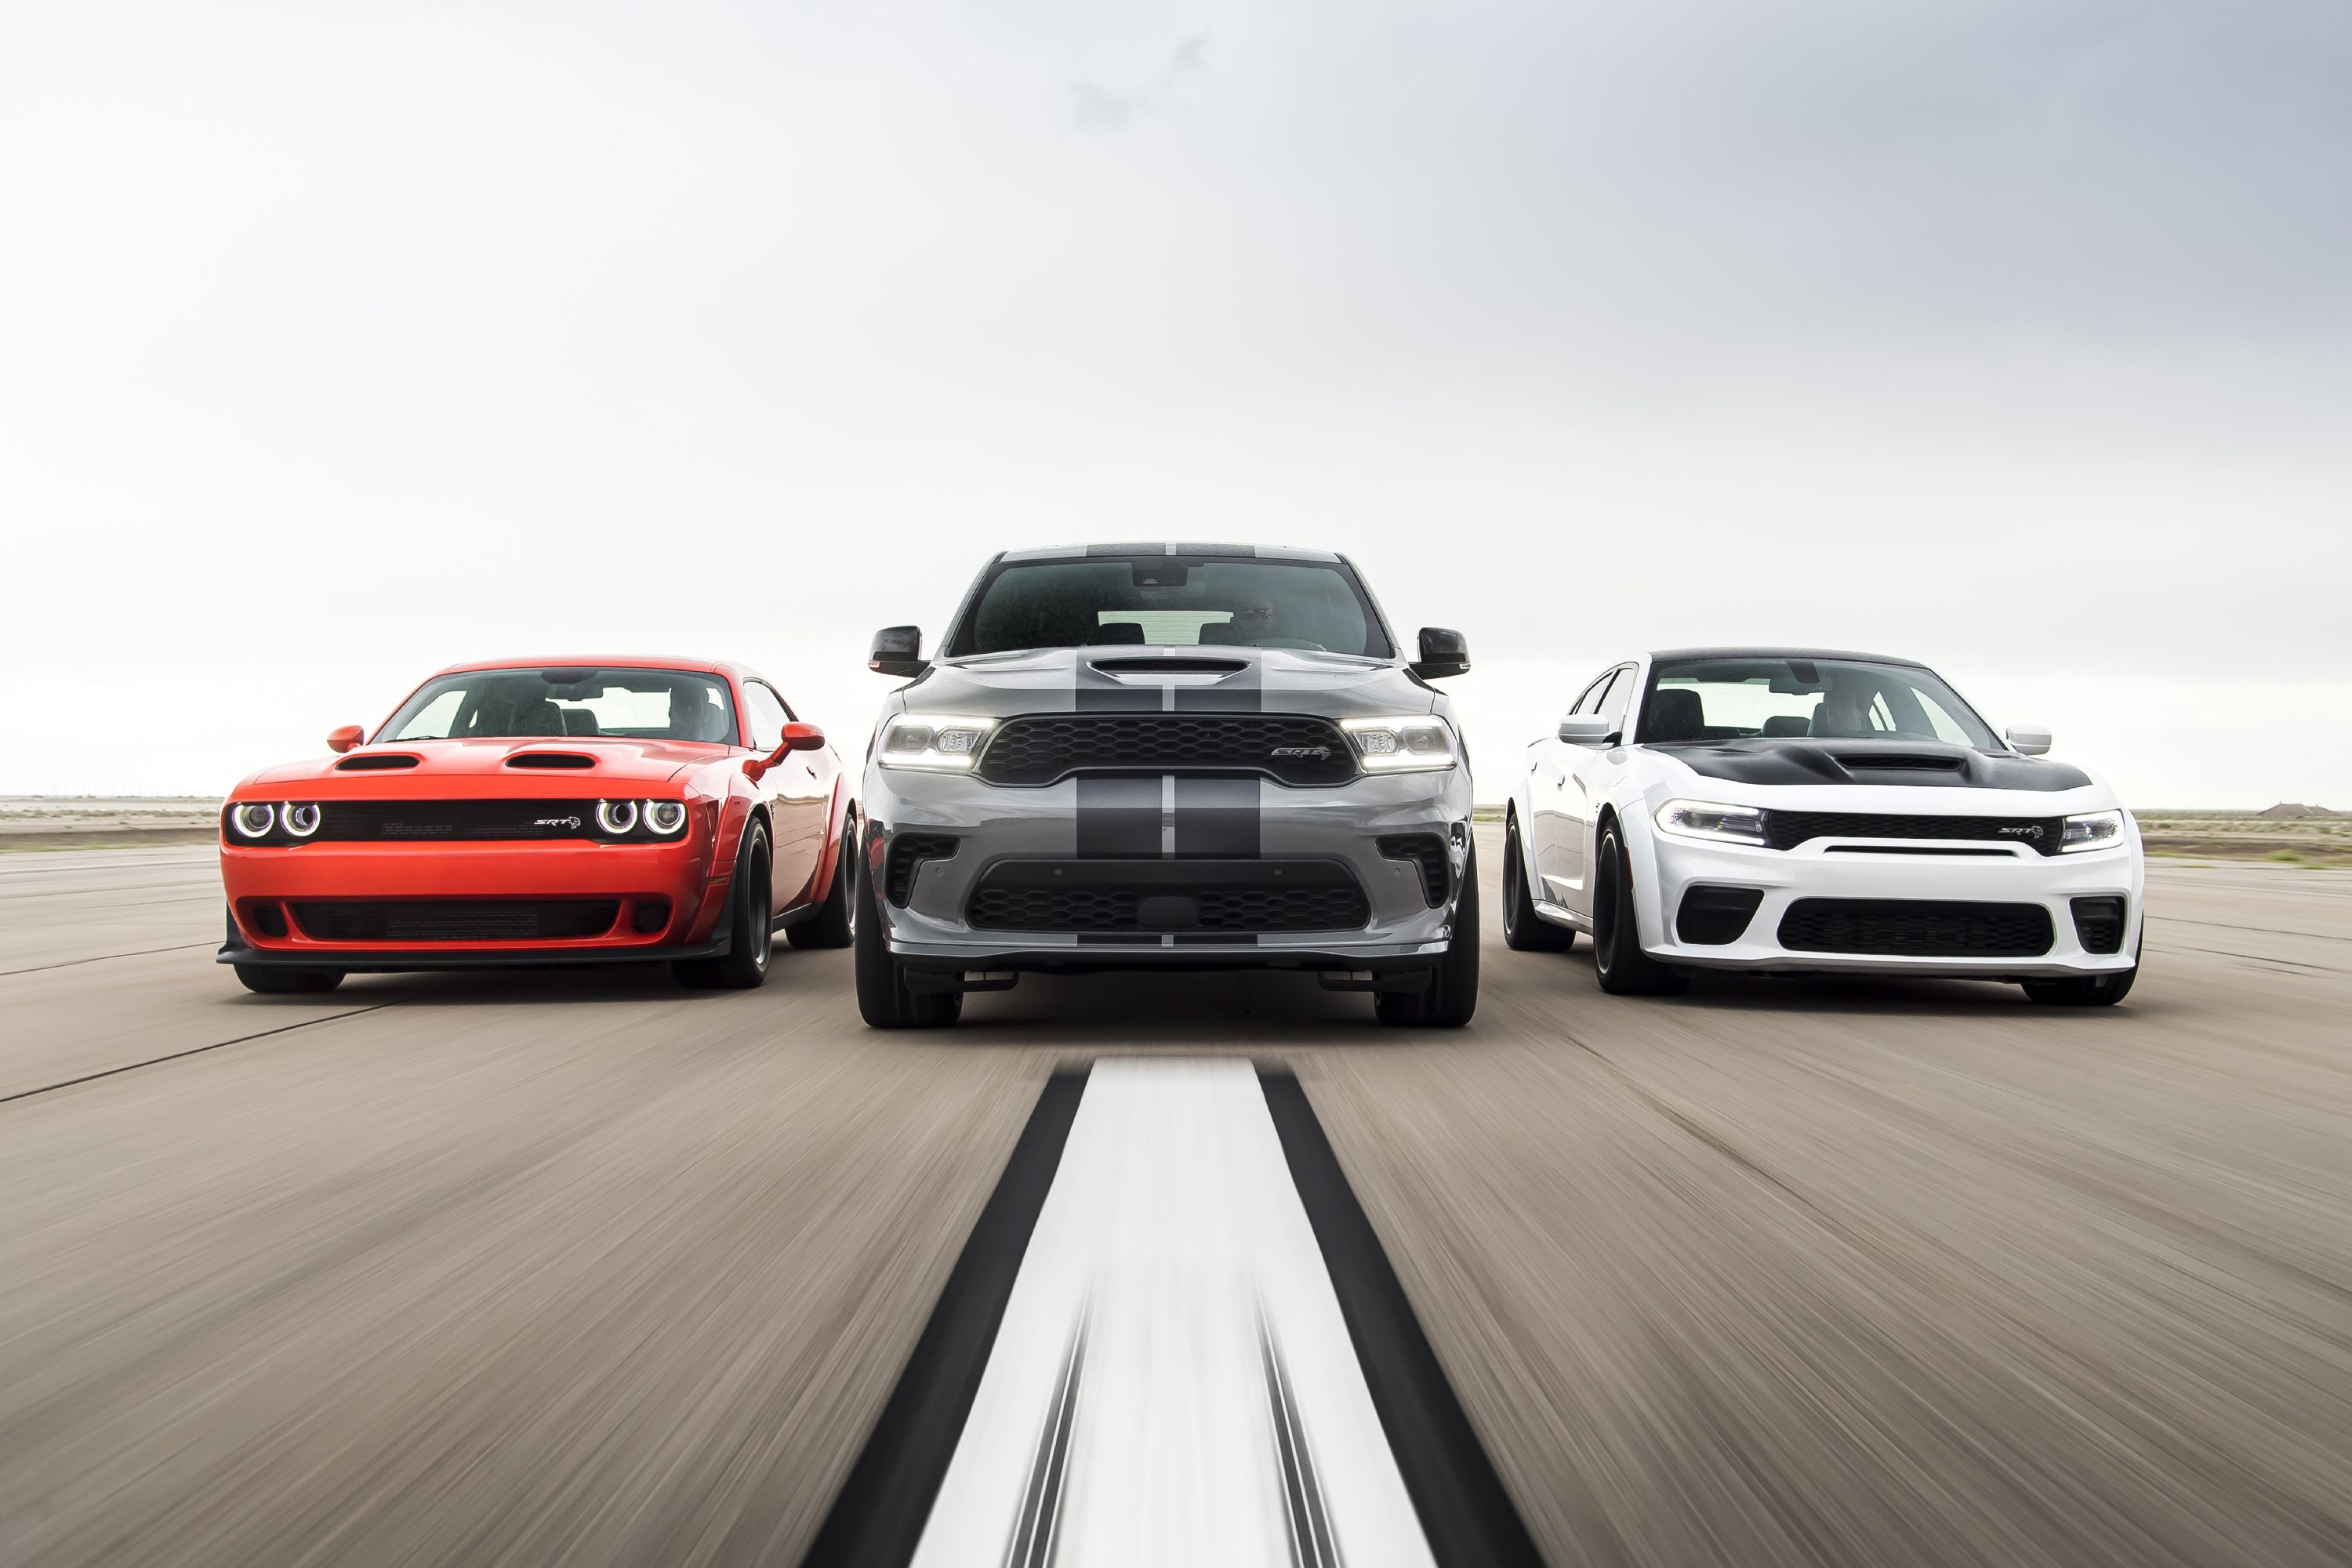 dodge latest models 5 New Dodge Vehicles with at Least 5 HP Coming for 5